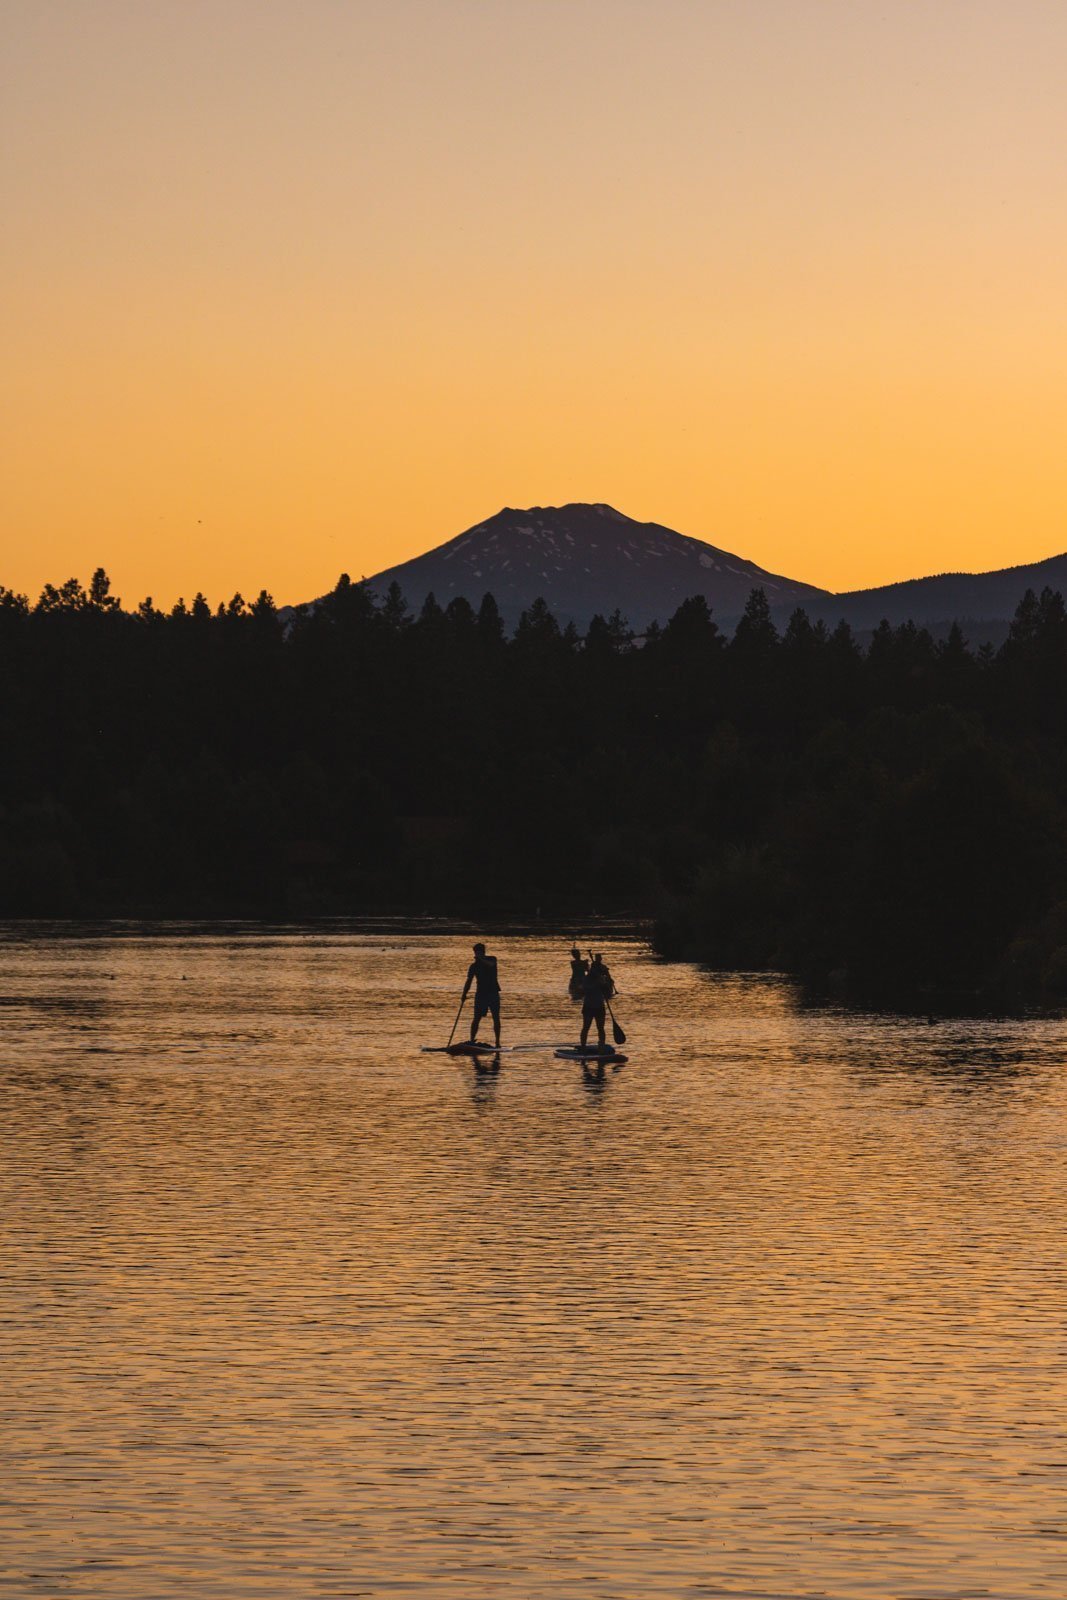 If you're looking for adventurous things to do in Sunriver, be sure to check out the Deschutes River trail.